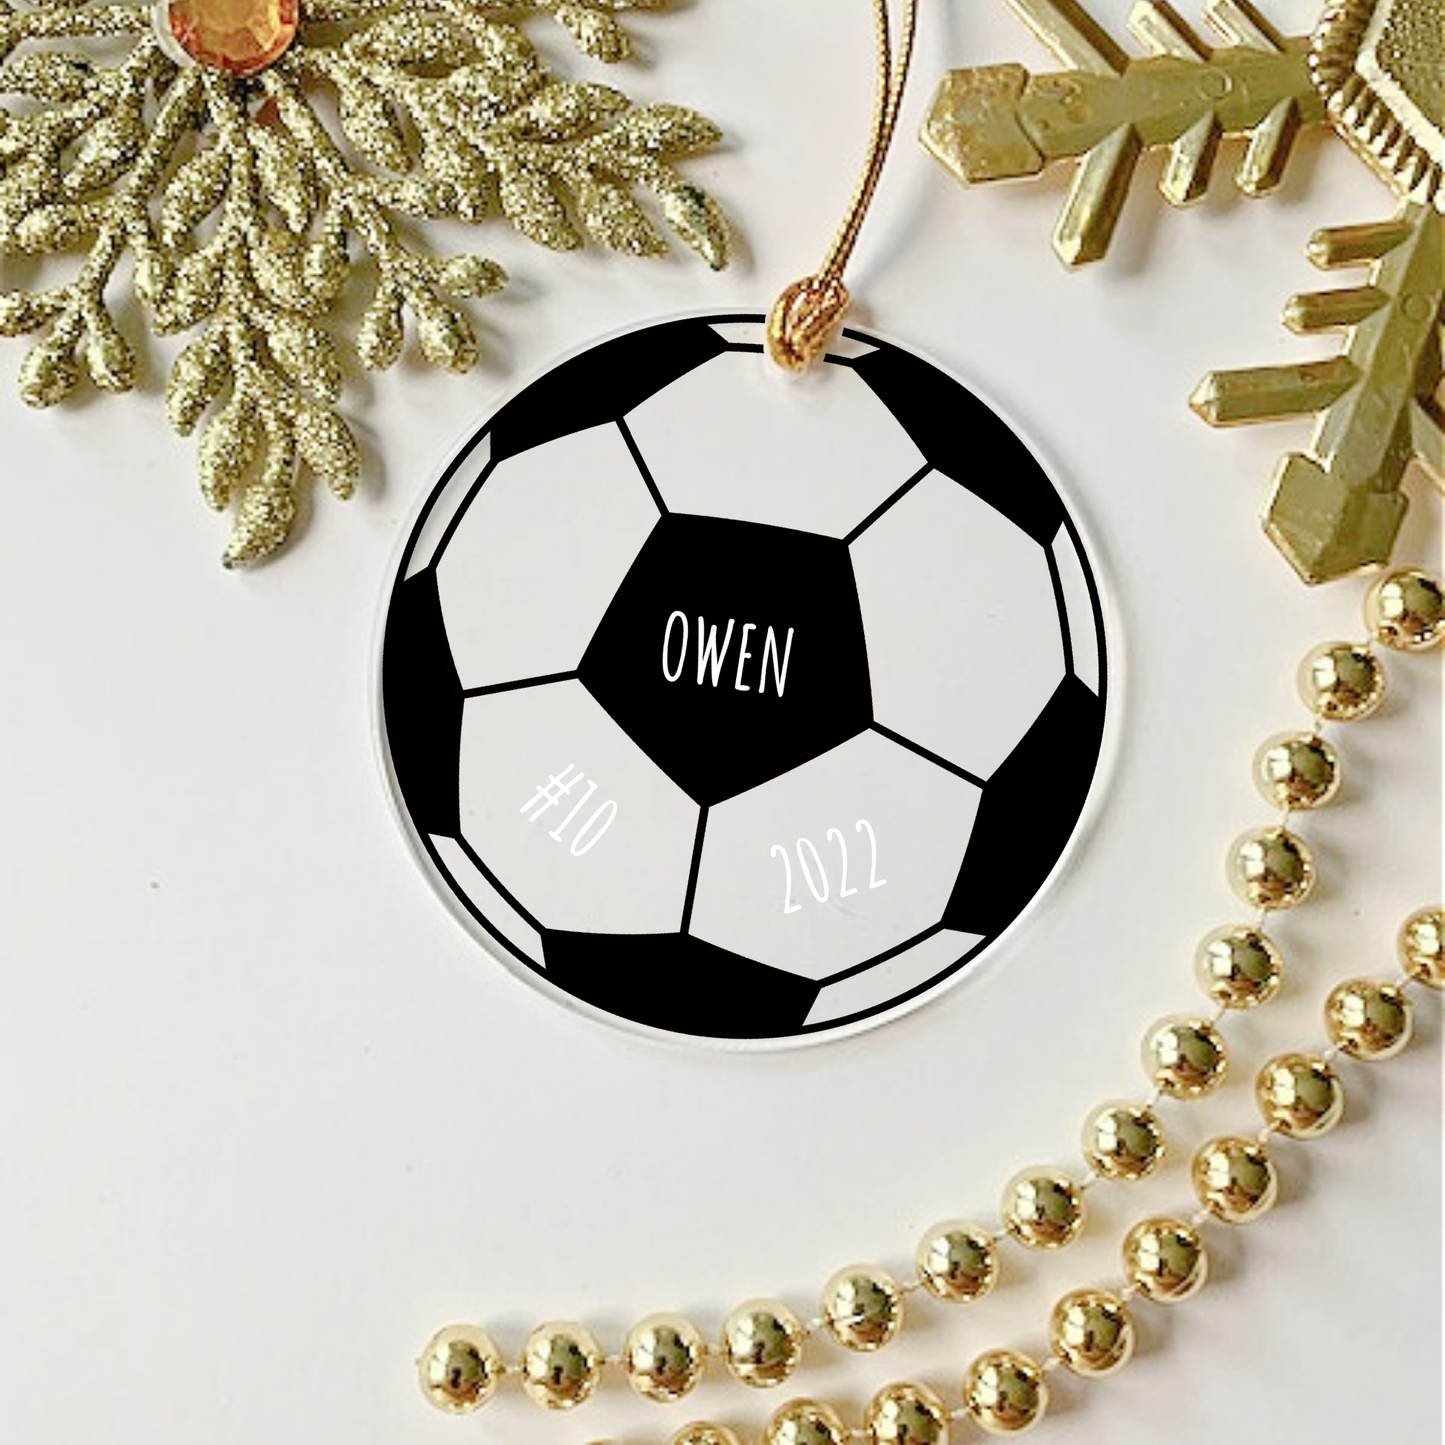 Soccer Ball Ornament with Personalized Engraved Name